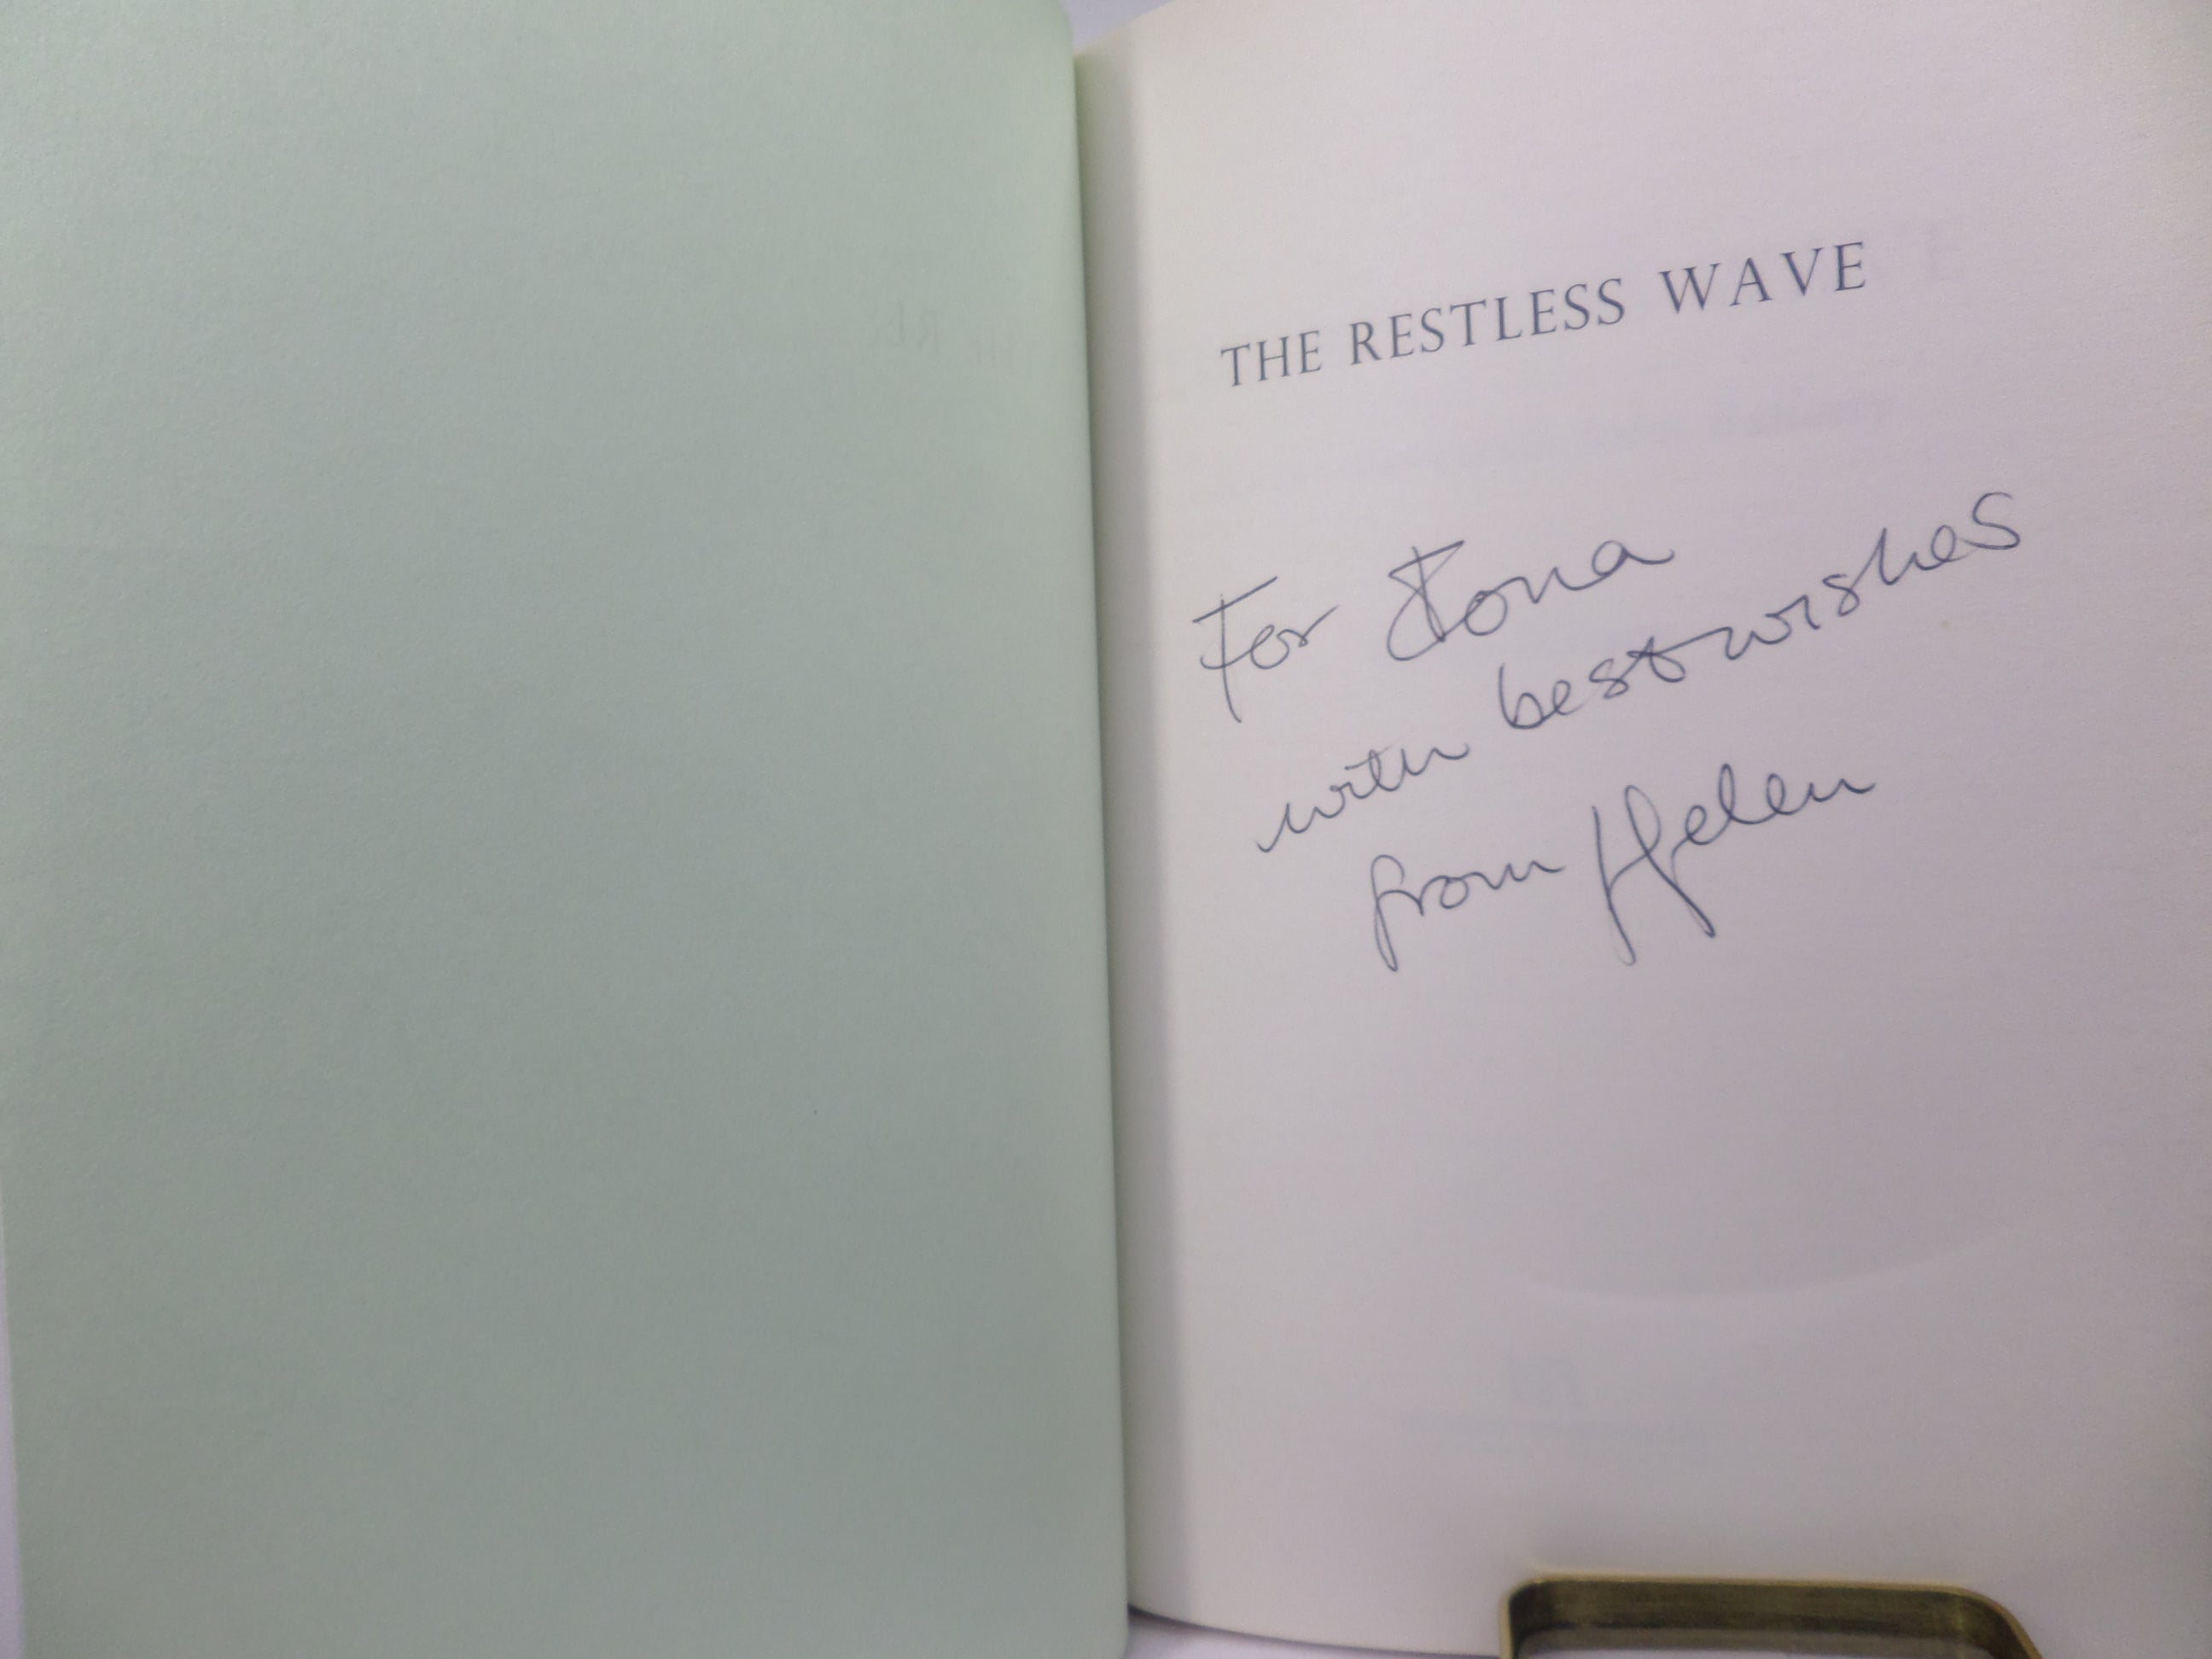 THE RESTLESS WAVE: MY TWO LIVES WITH JOHN BELLANY 2018 SIGNED FIRST EDITION